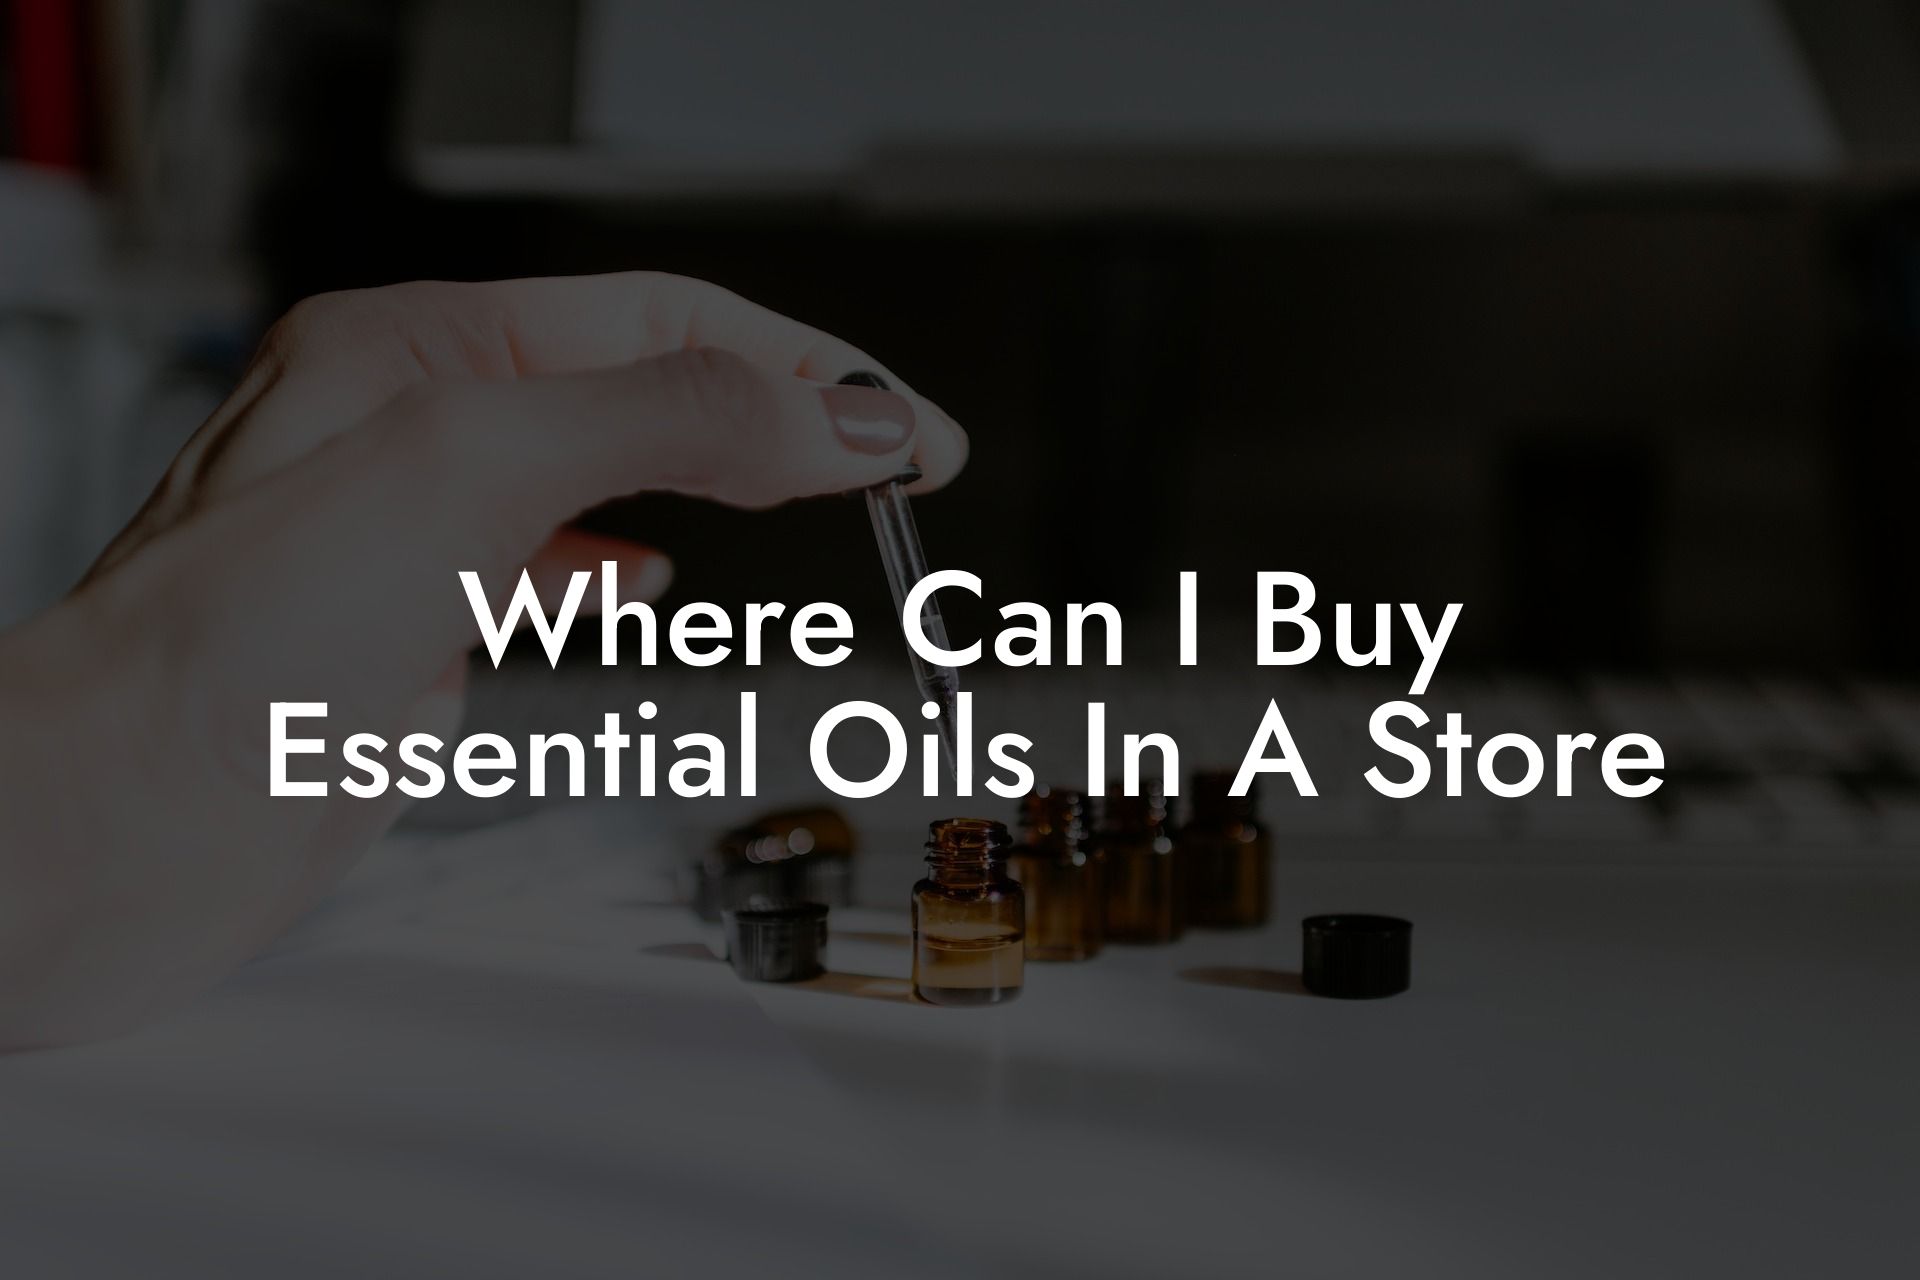 Where Can I Buy Essential Oils In A Store